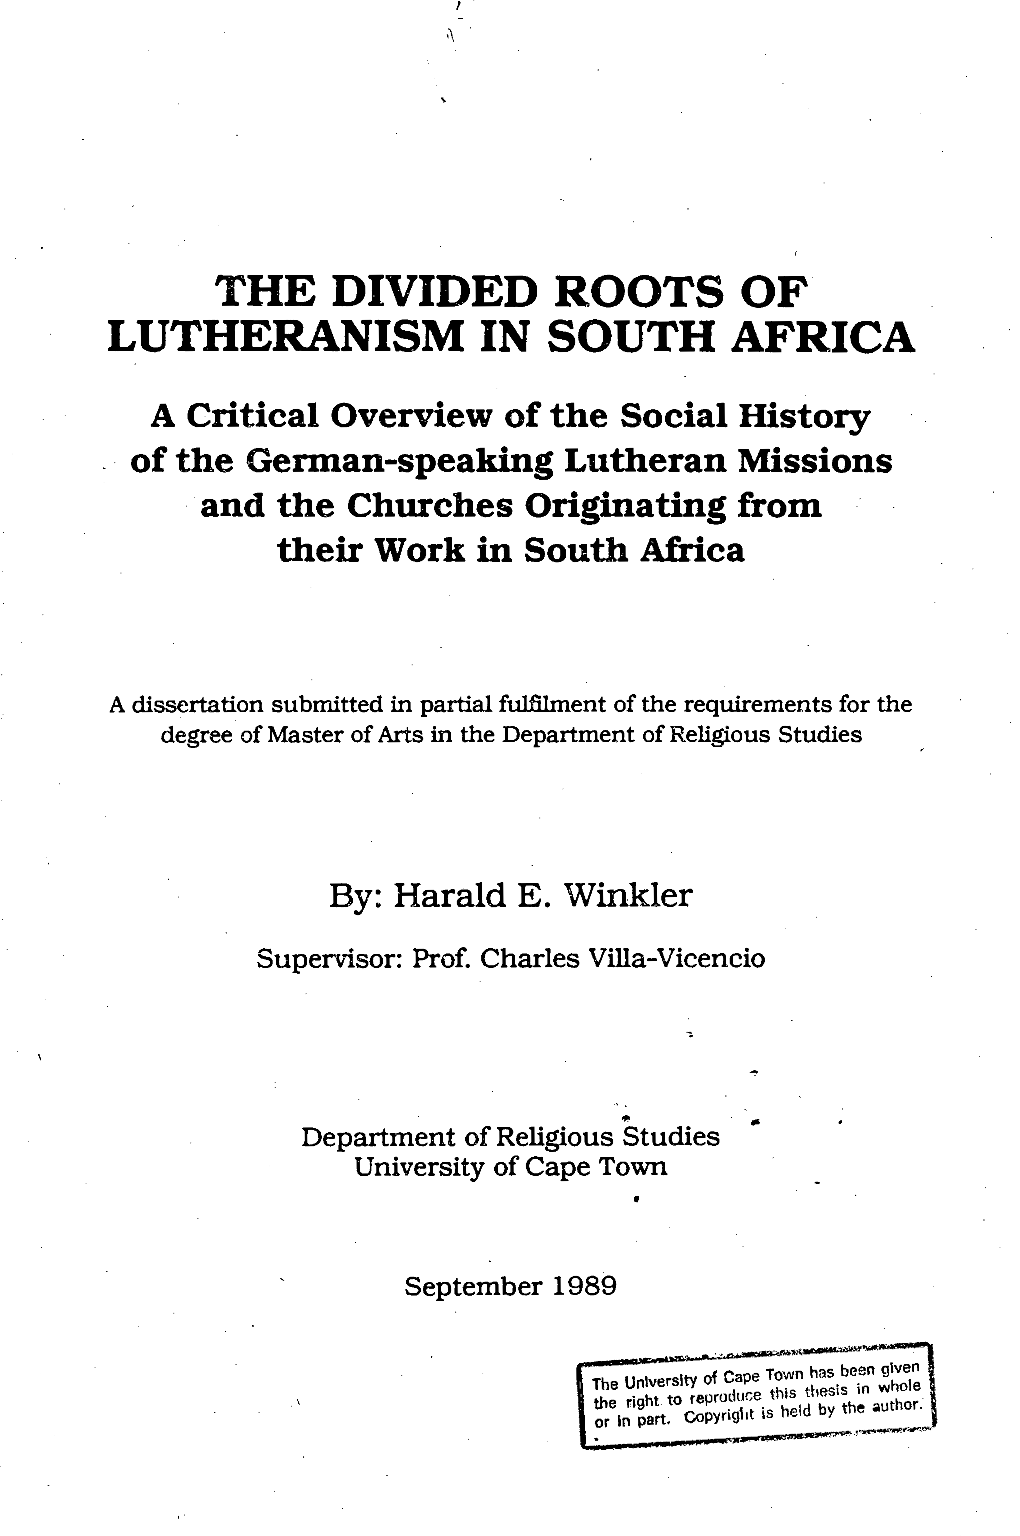 The Divided Roots of Lutheranism in South Africa